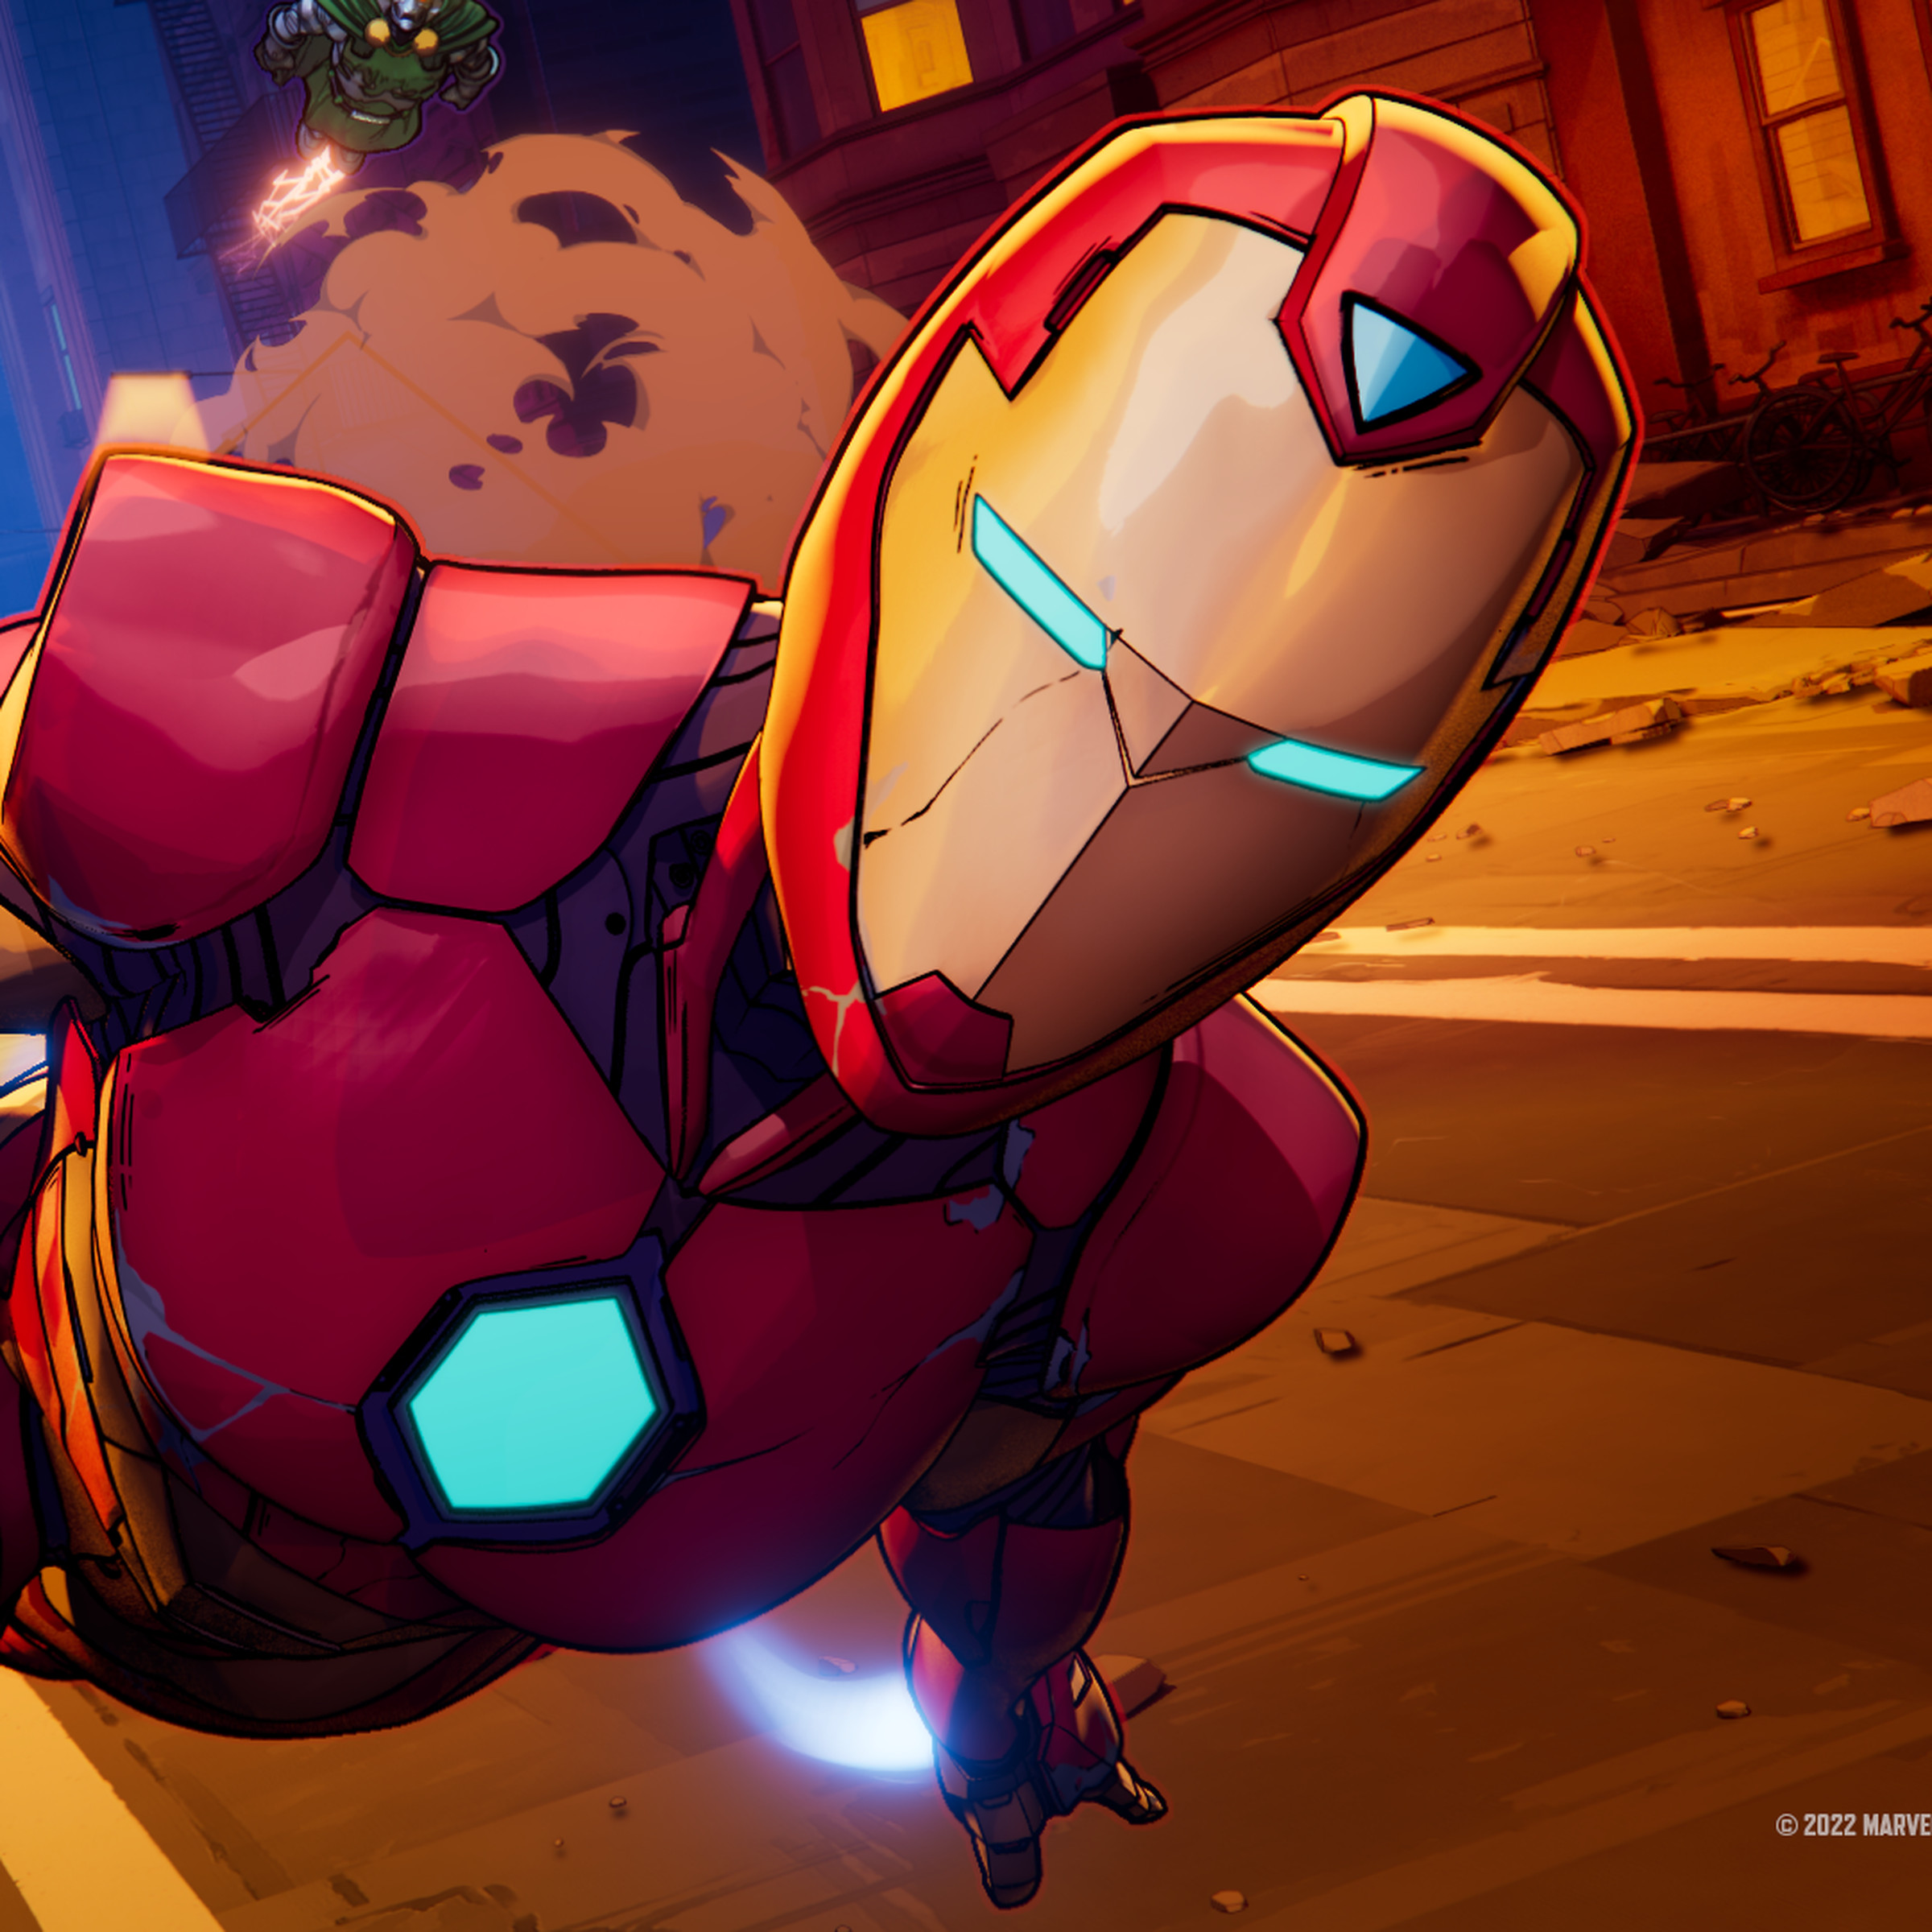 Graphic from Marvel Snap featuring Ironman rocketing into battle